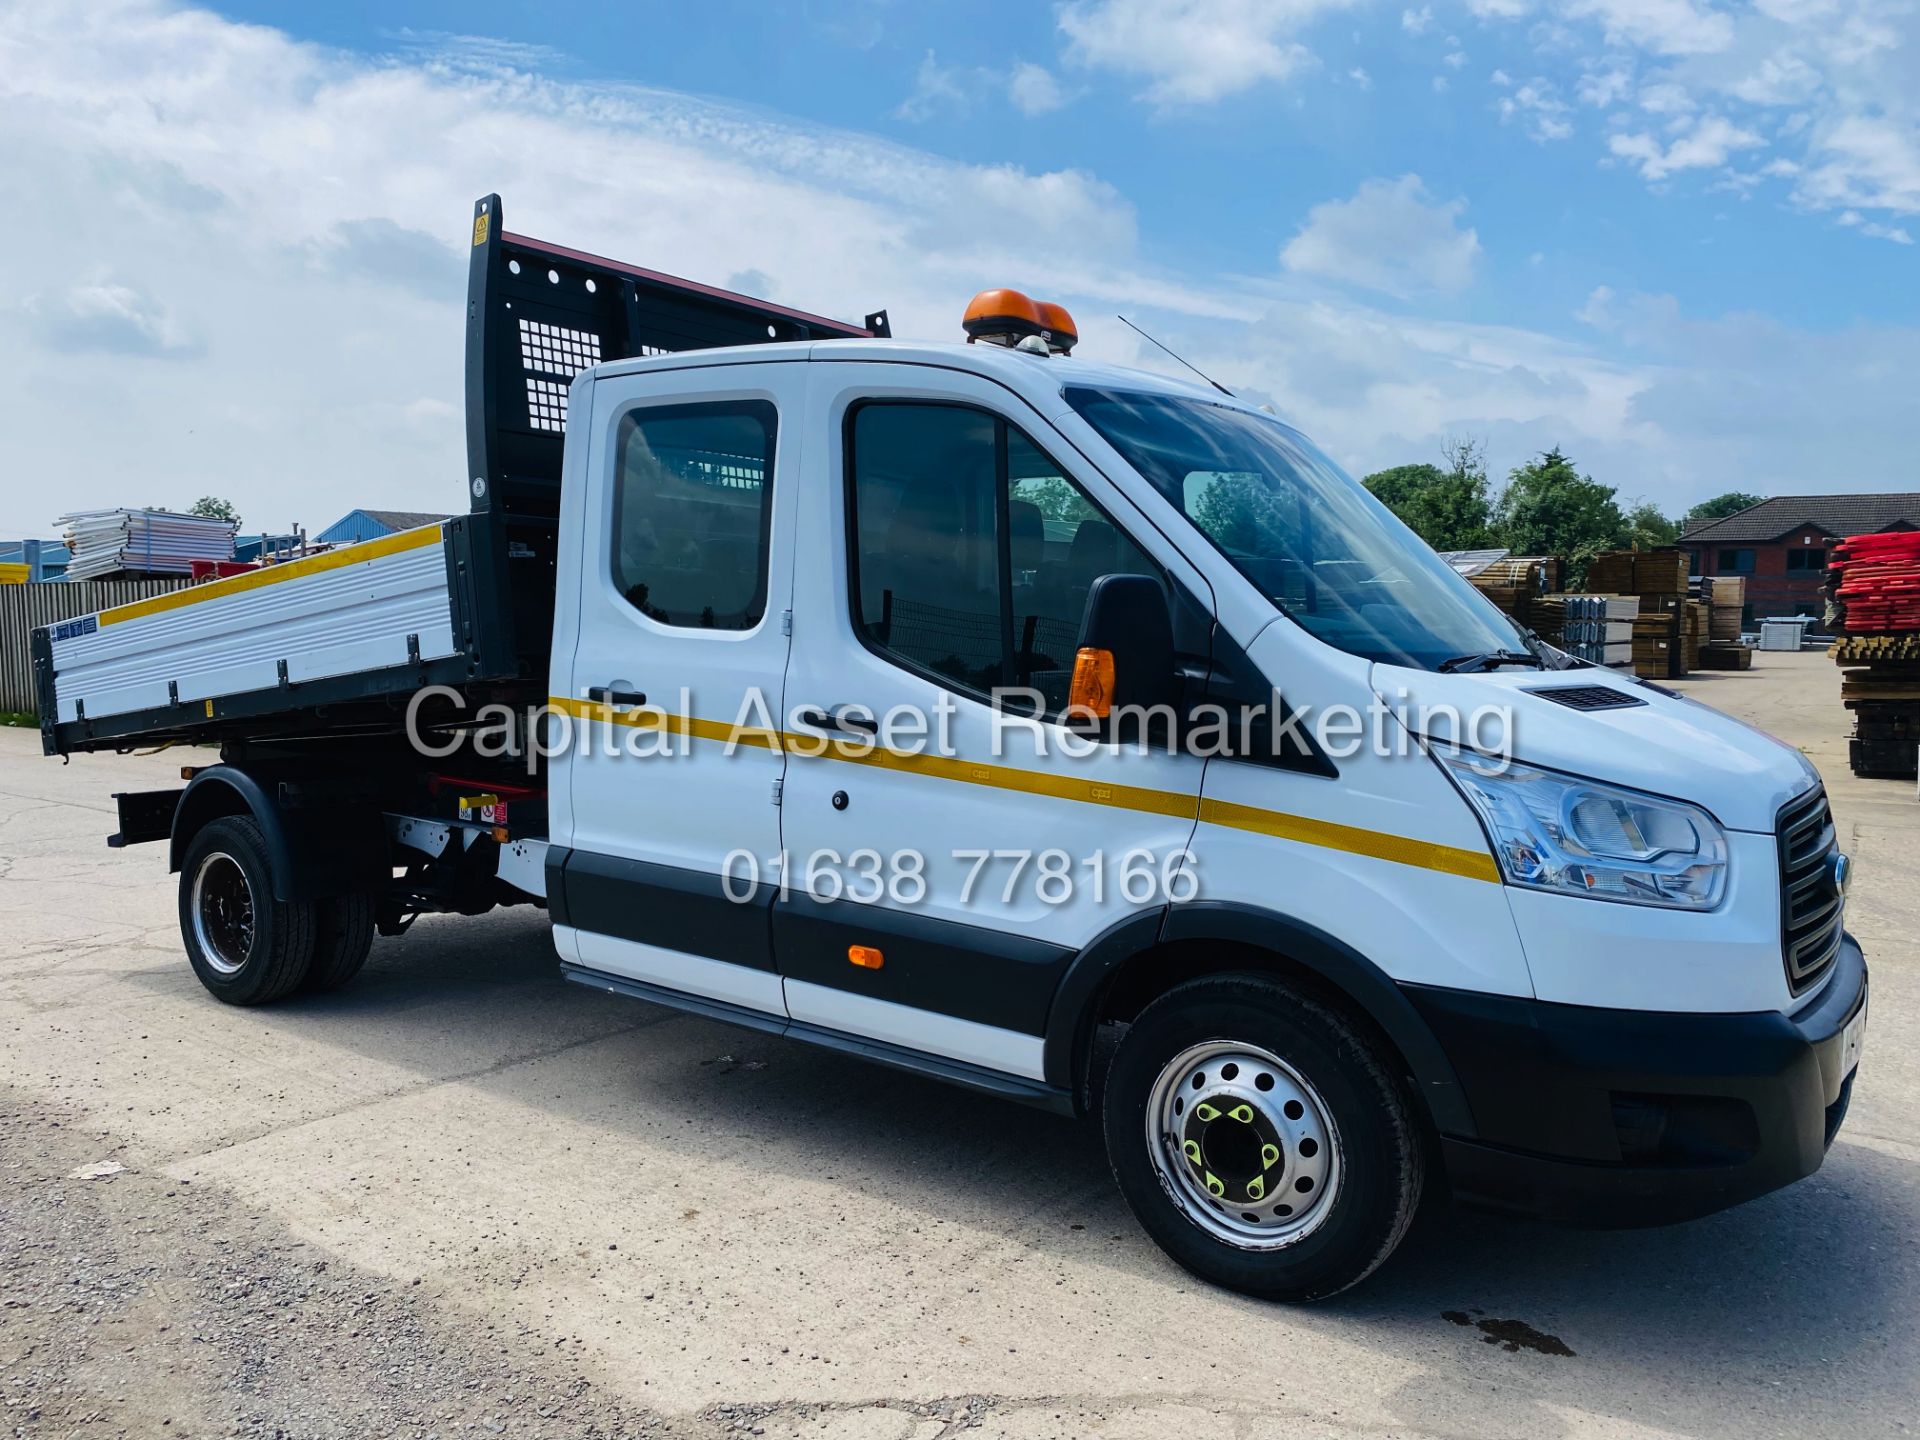 ON SALE FORD TRANSIT 2.2TDCI "125BHP" D/C TIPPER (2017 MODEL) EURO 6 - TWIN REAR WHEELS - 7 SEATER - Image 2 of 21